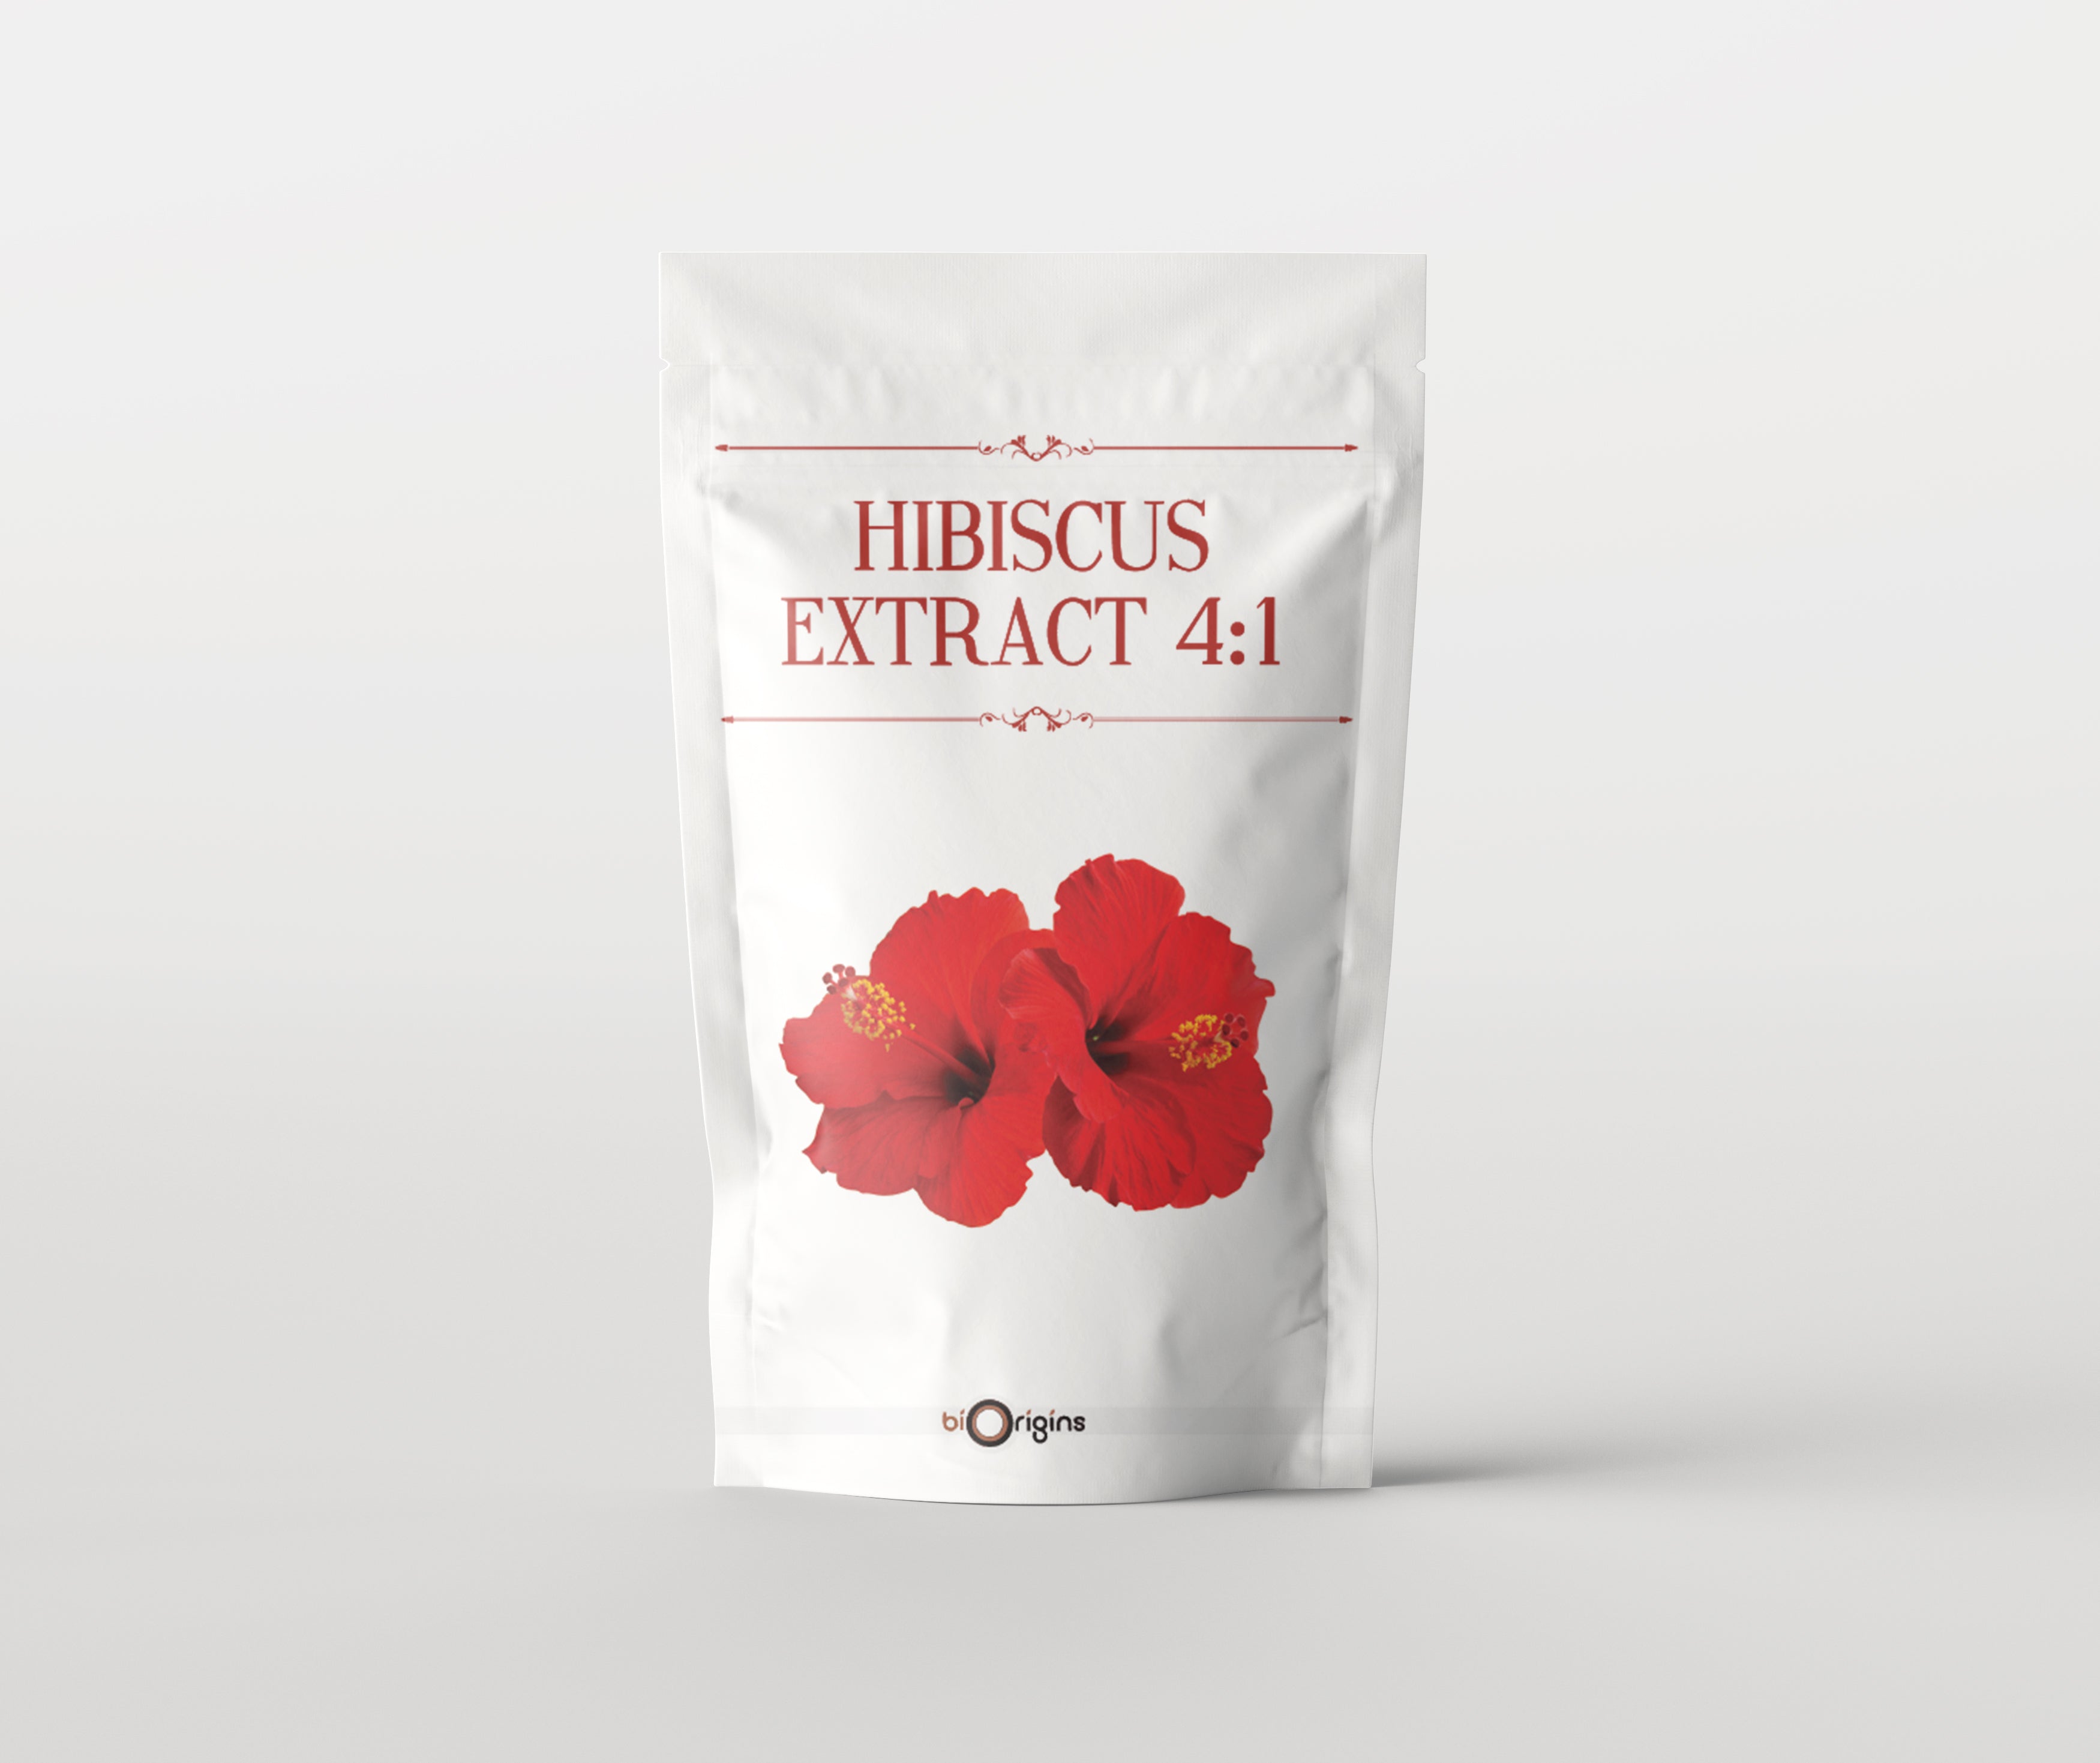 Hibiscus Extract 4:1 Powder - Herbal Extracts